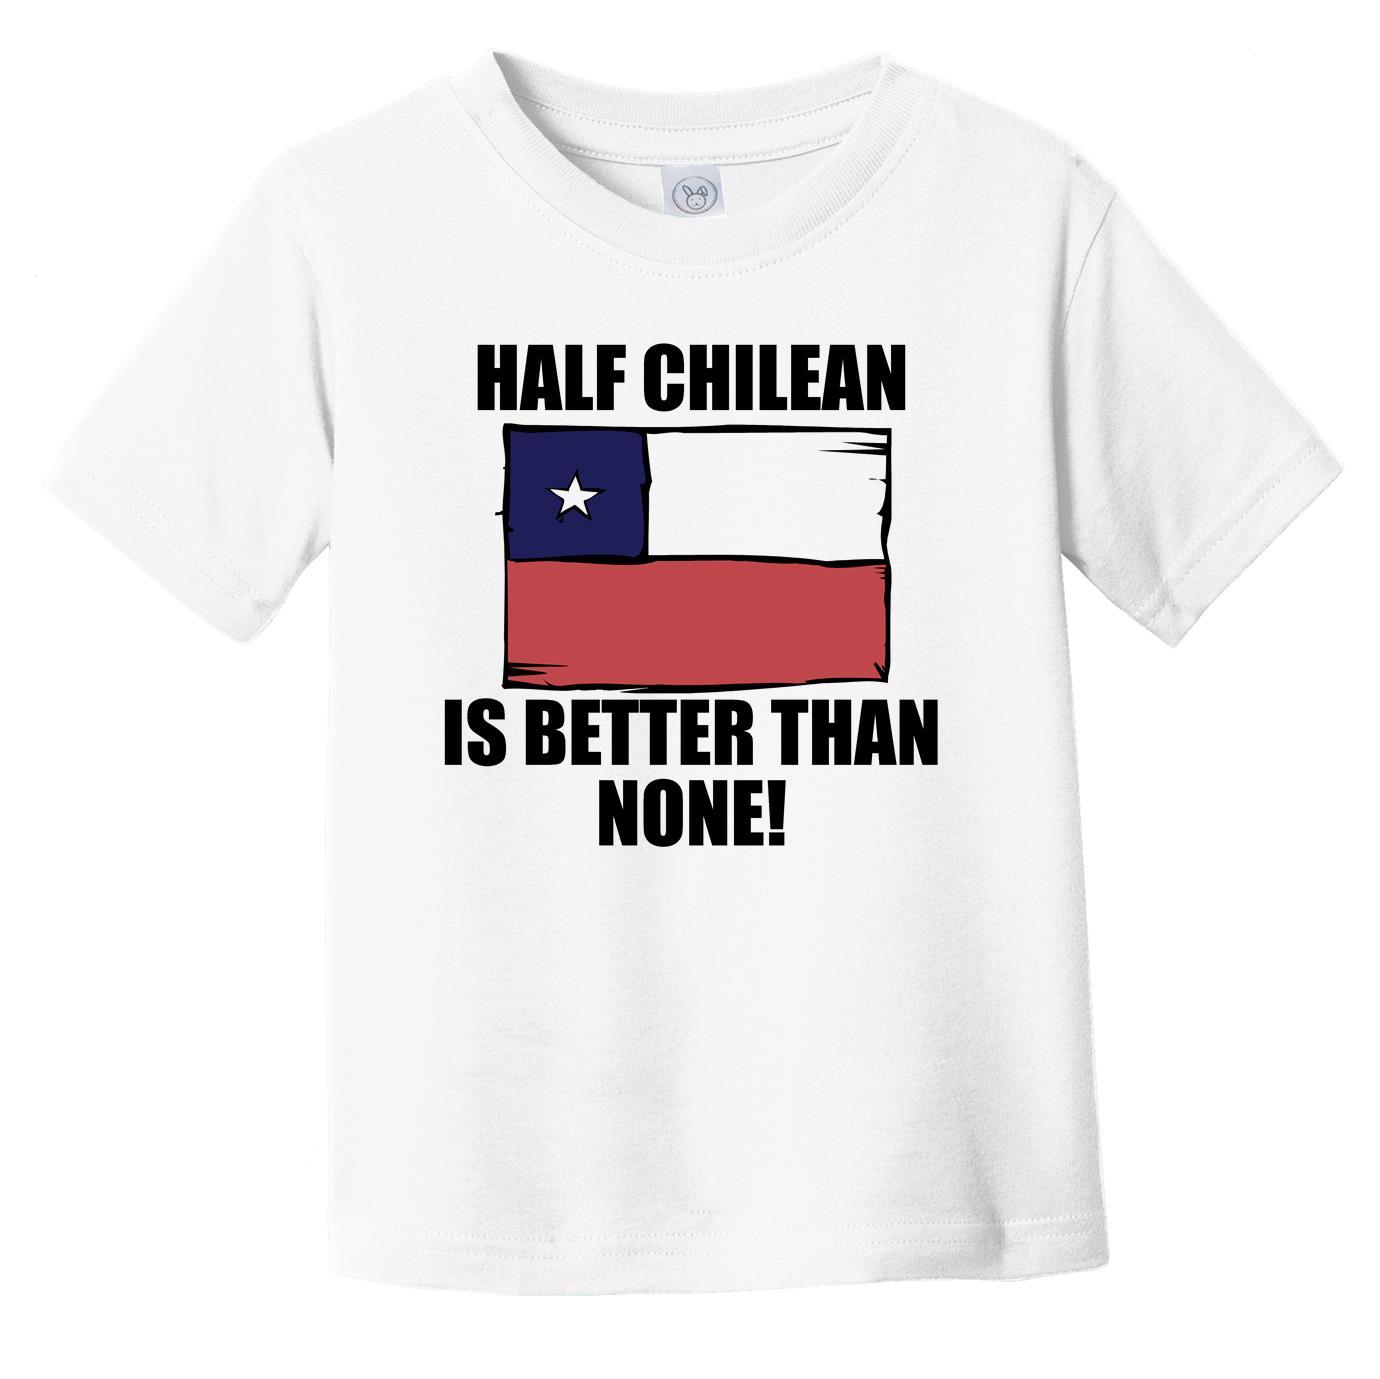 Half Chilean Is Better Than None Infant Toddler T-Shirt